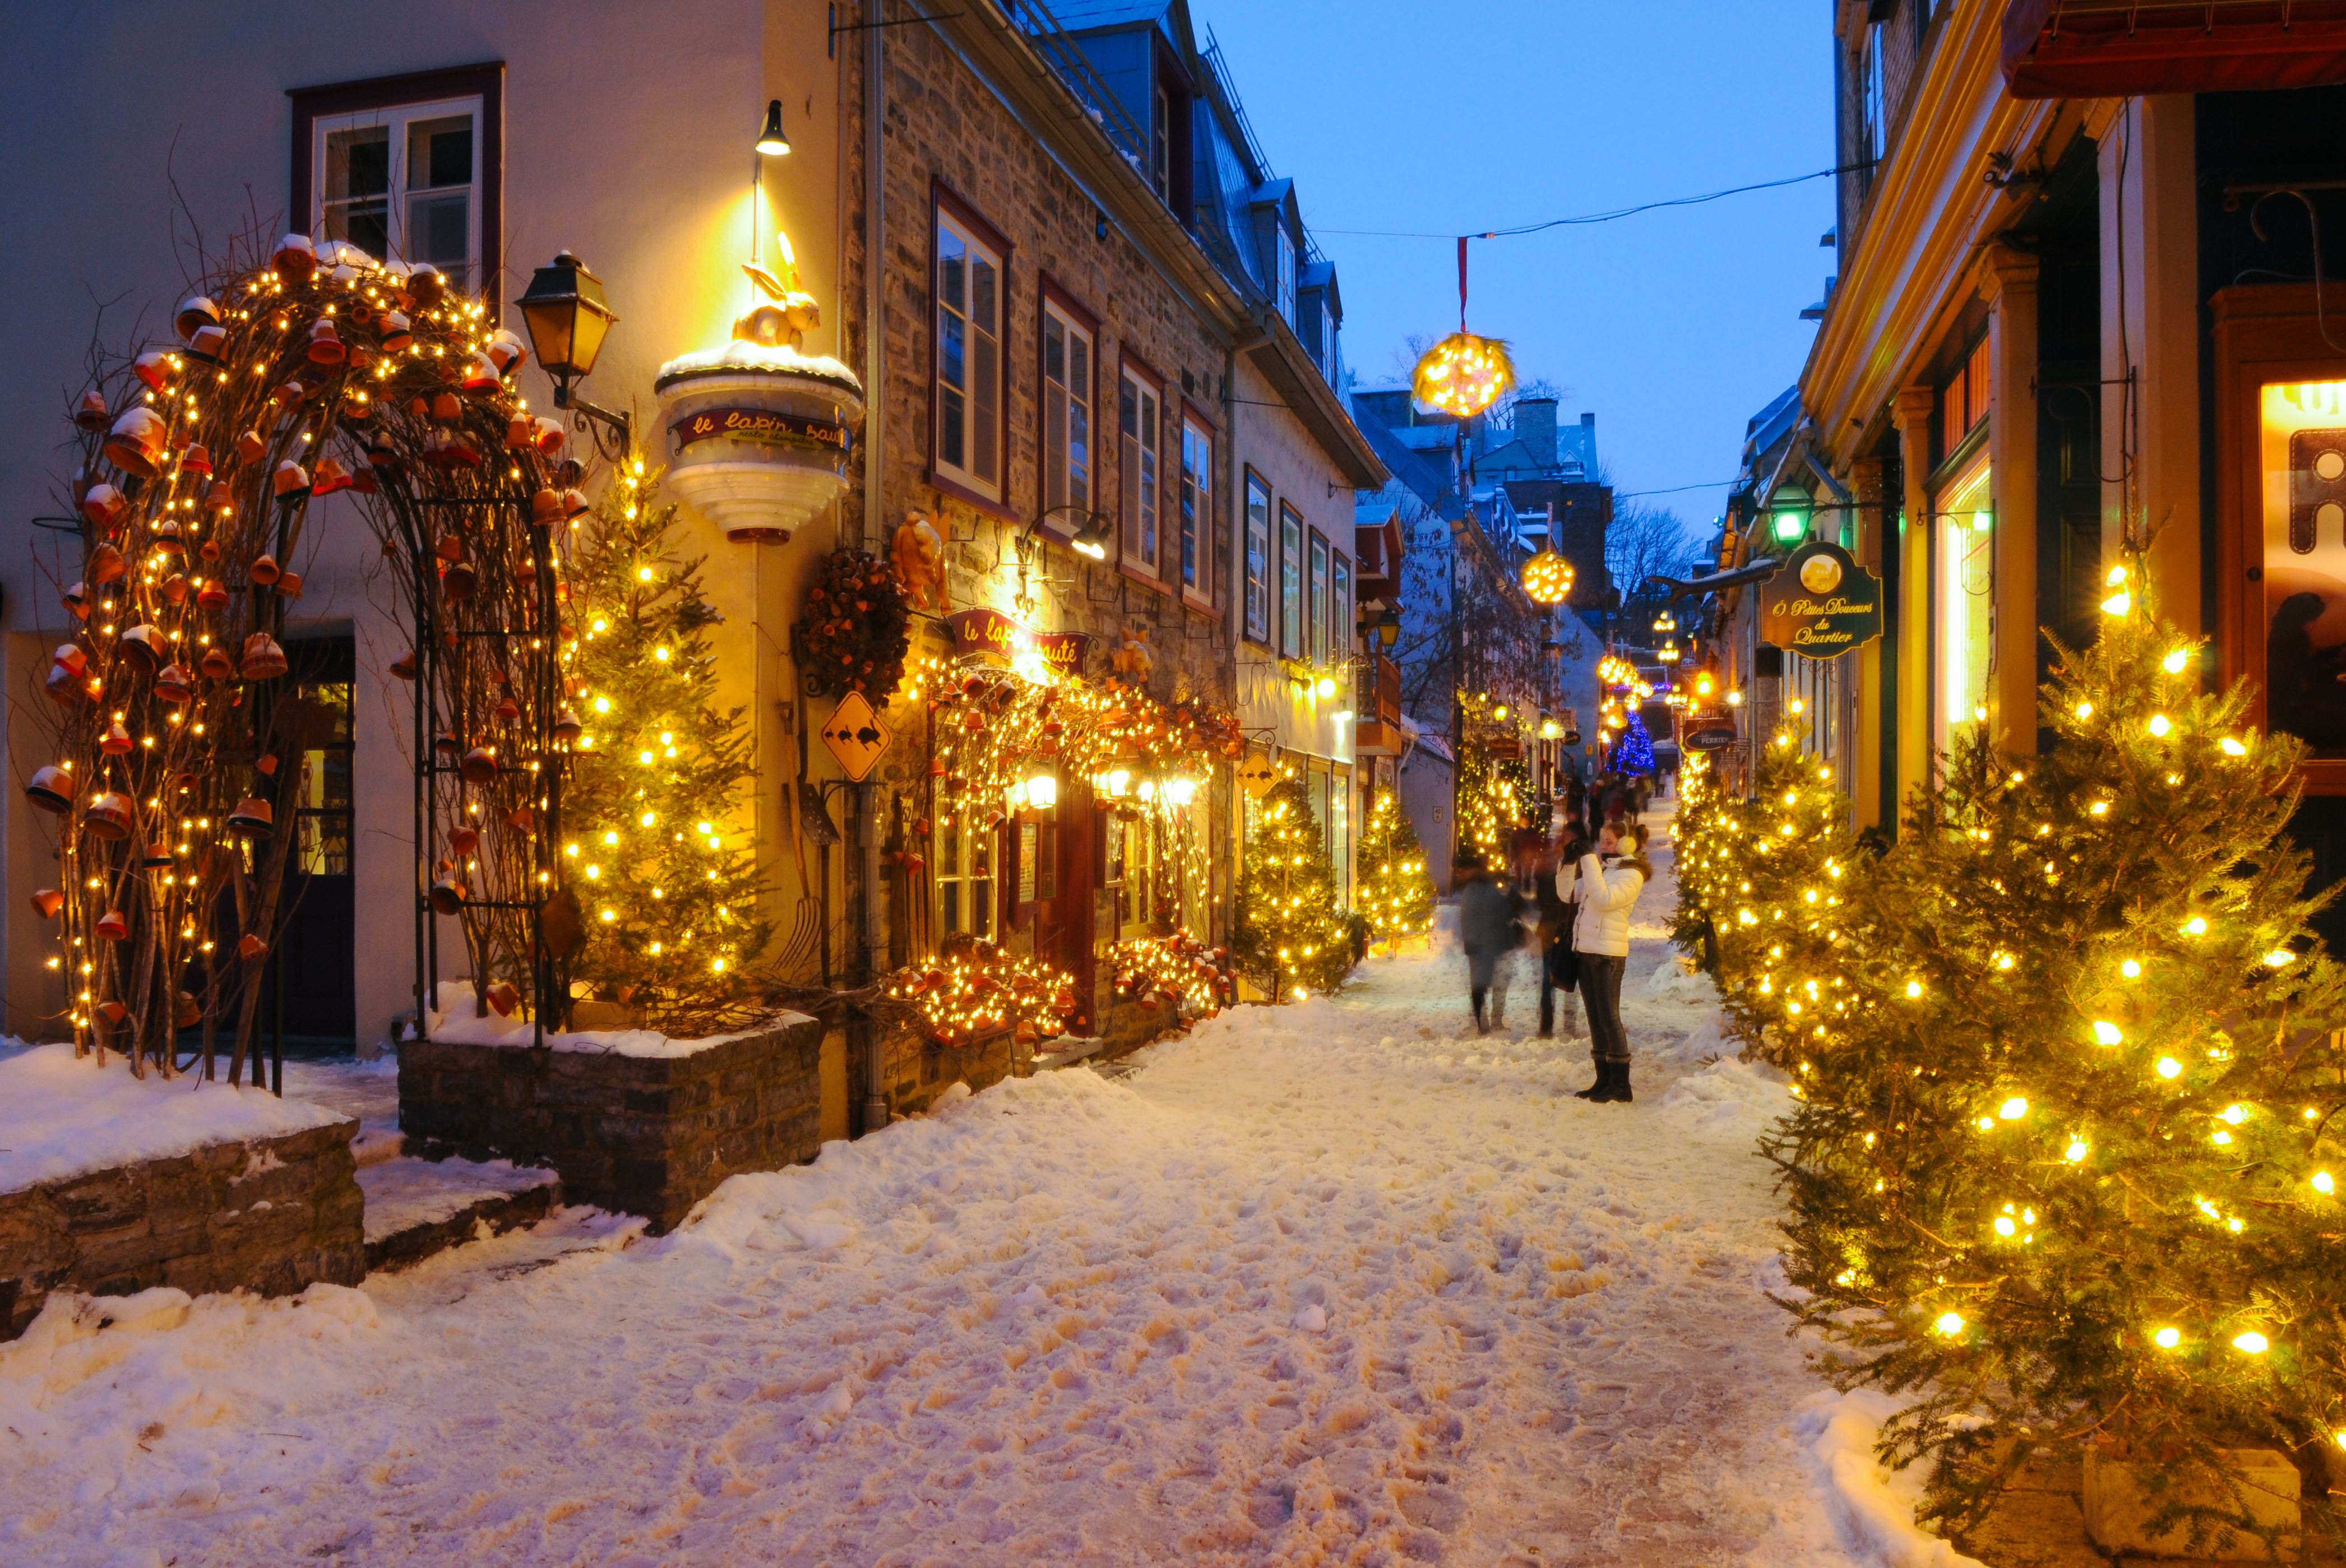 Quebec, "Best Winter Wonderland", according to USA Today - Le C3 Hotel